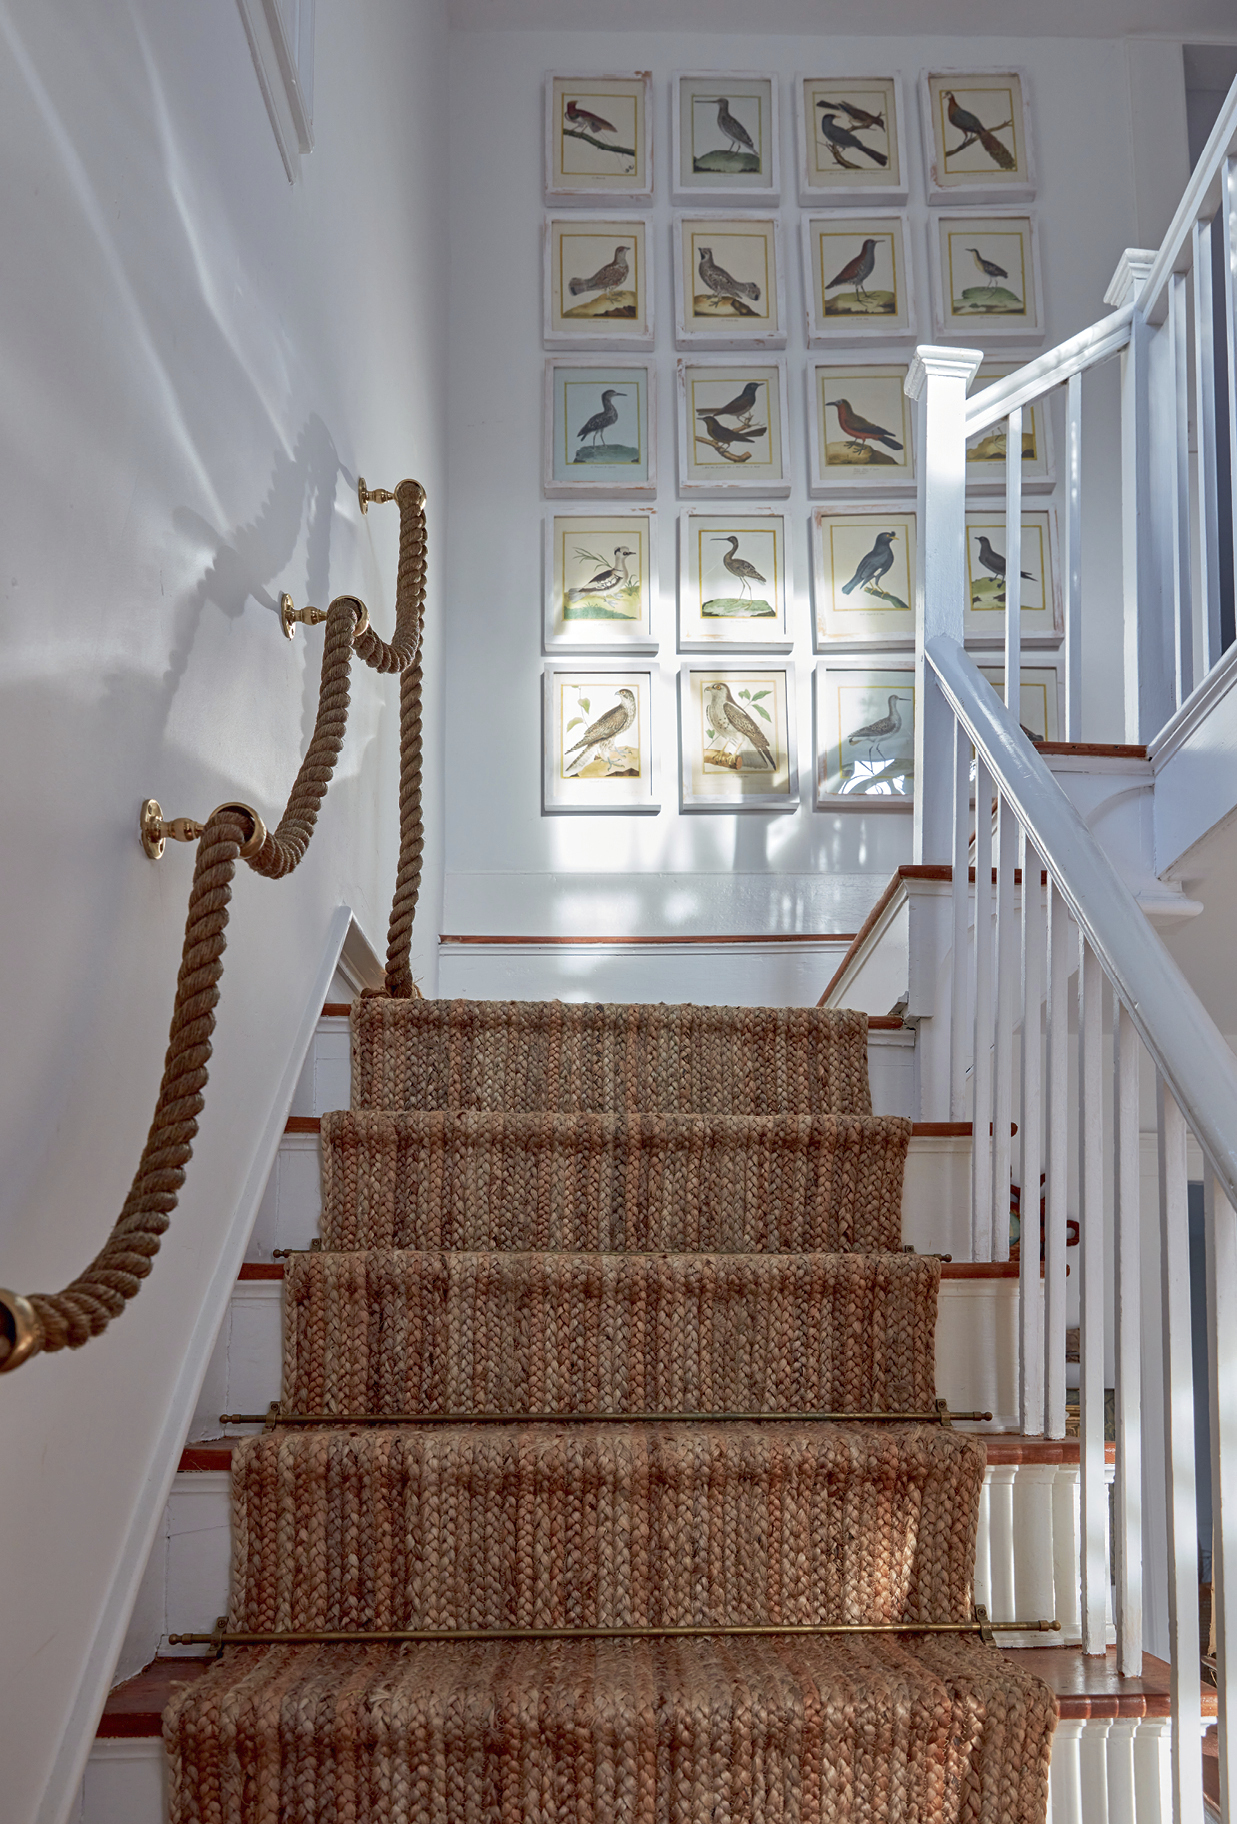 Coastal accents on stairs and bird prints in Nora Murphy COUNTRY HOUSE LIVING. #newenglandstyle #americancountry #americanfarmhouse